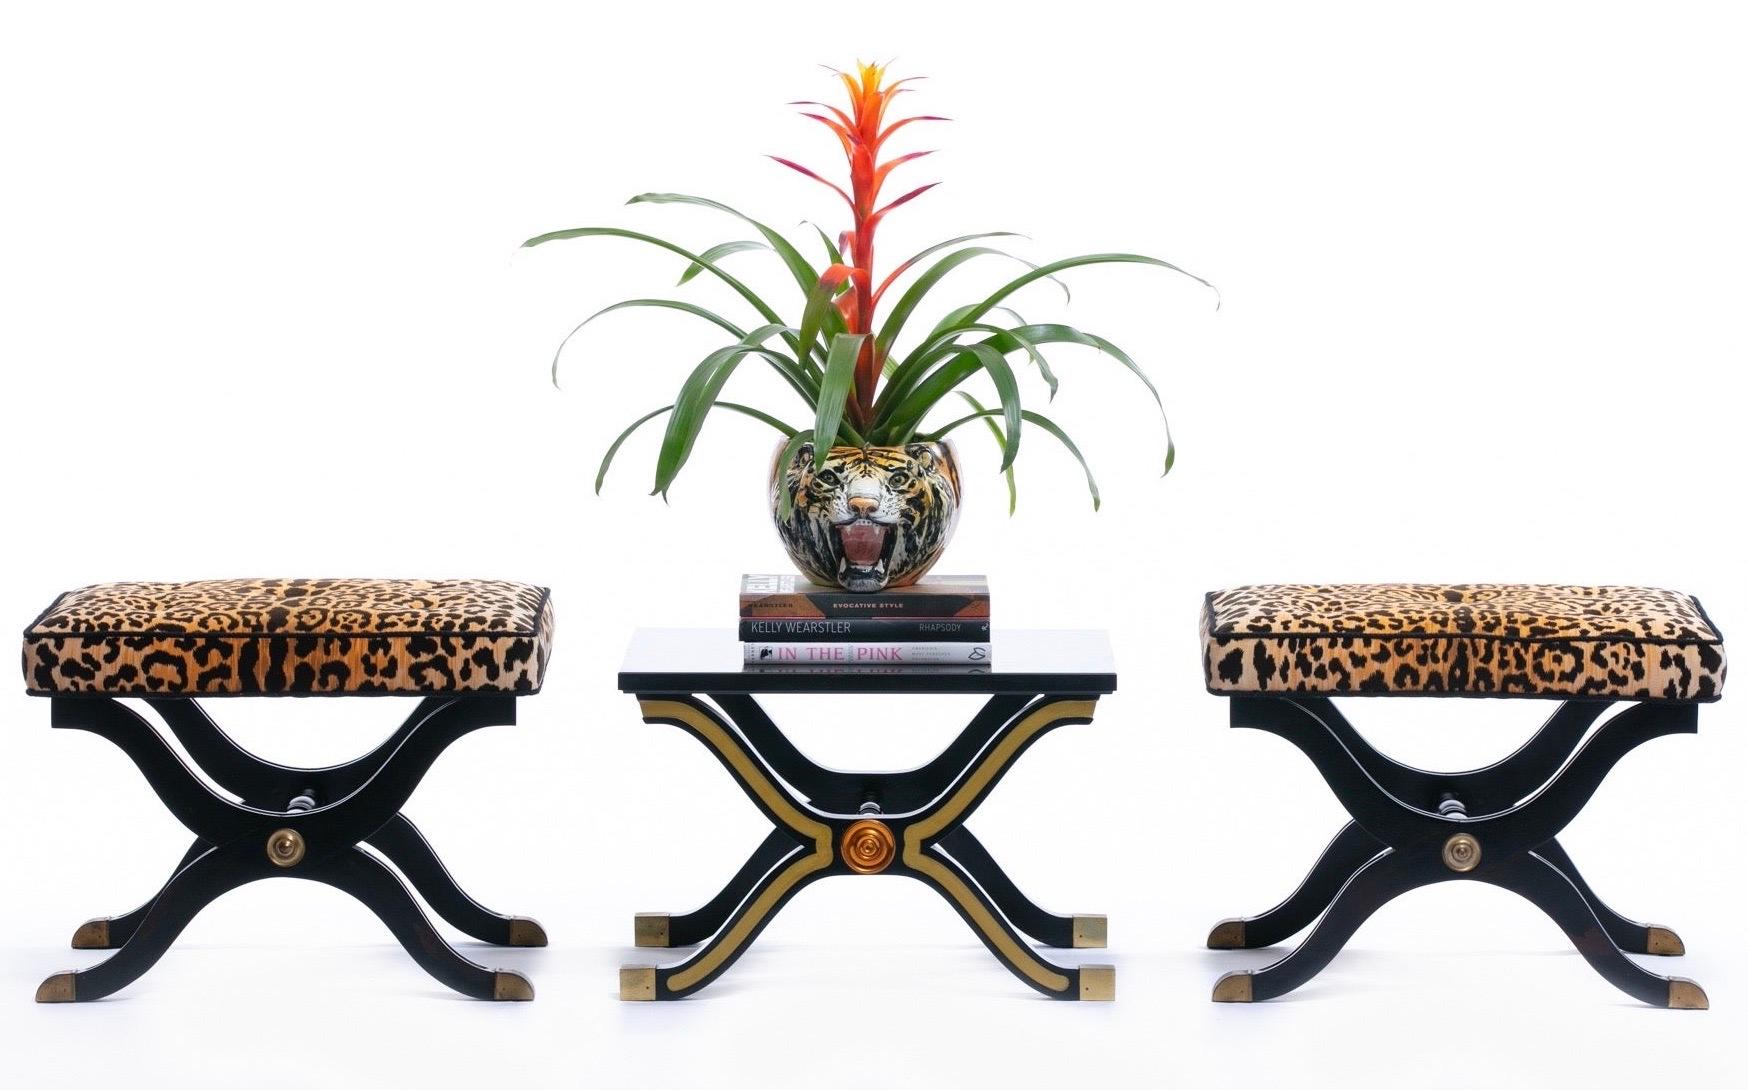 Hand painted Italian midcentury ceramic tiger planter. Festive. Fun. Lots of hand painted detail, a work of ceramic art. Perfect accessory for adding a fun pop or vibe. Bring a bit of jungle into your decor! Want to see more beautiful things? Scroll